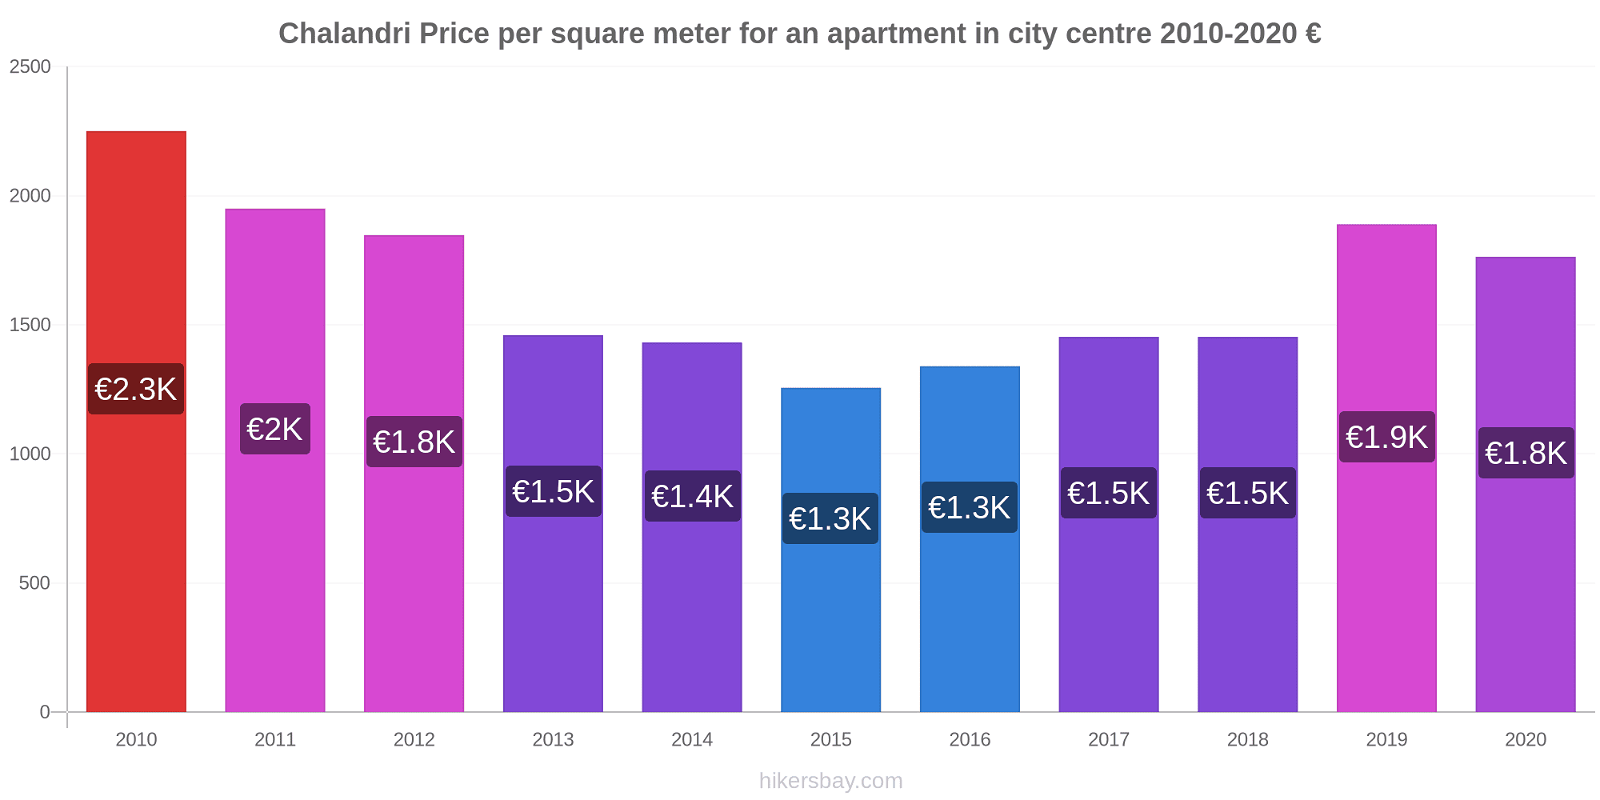 Chalandri price changes Price per square meter for an apartment in city centre hikersbay.com